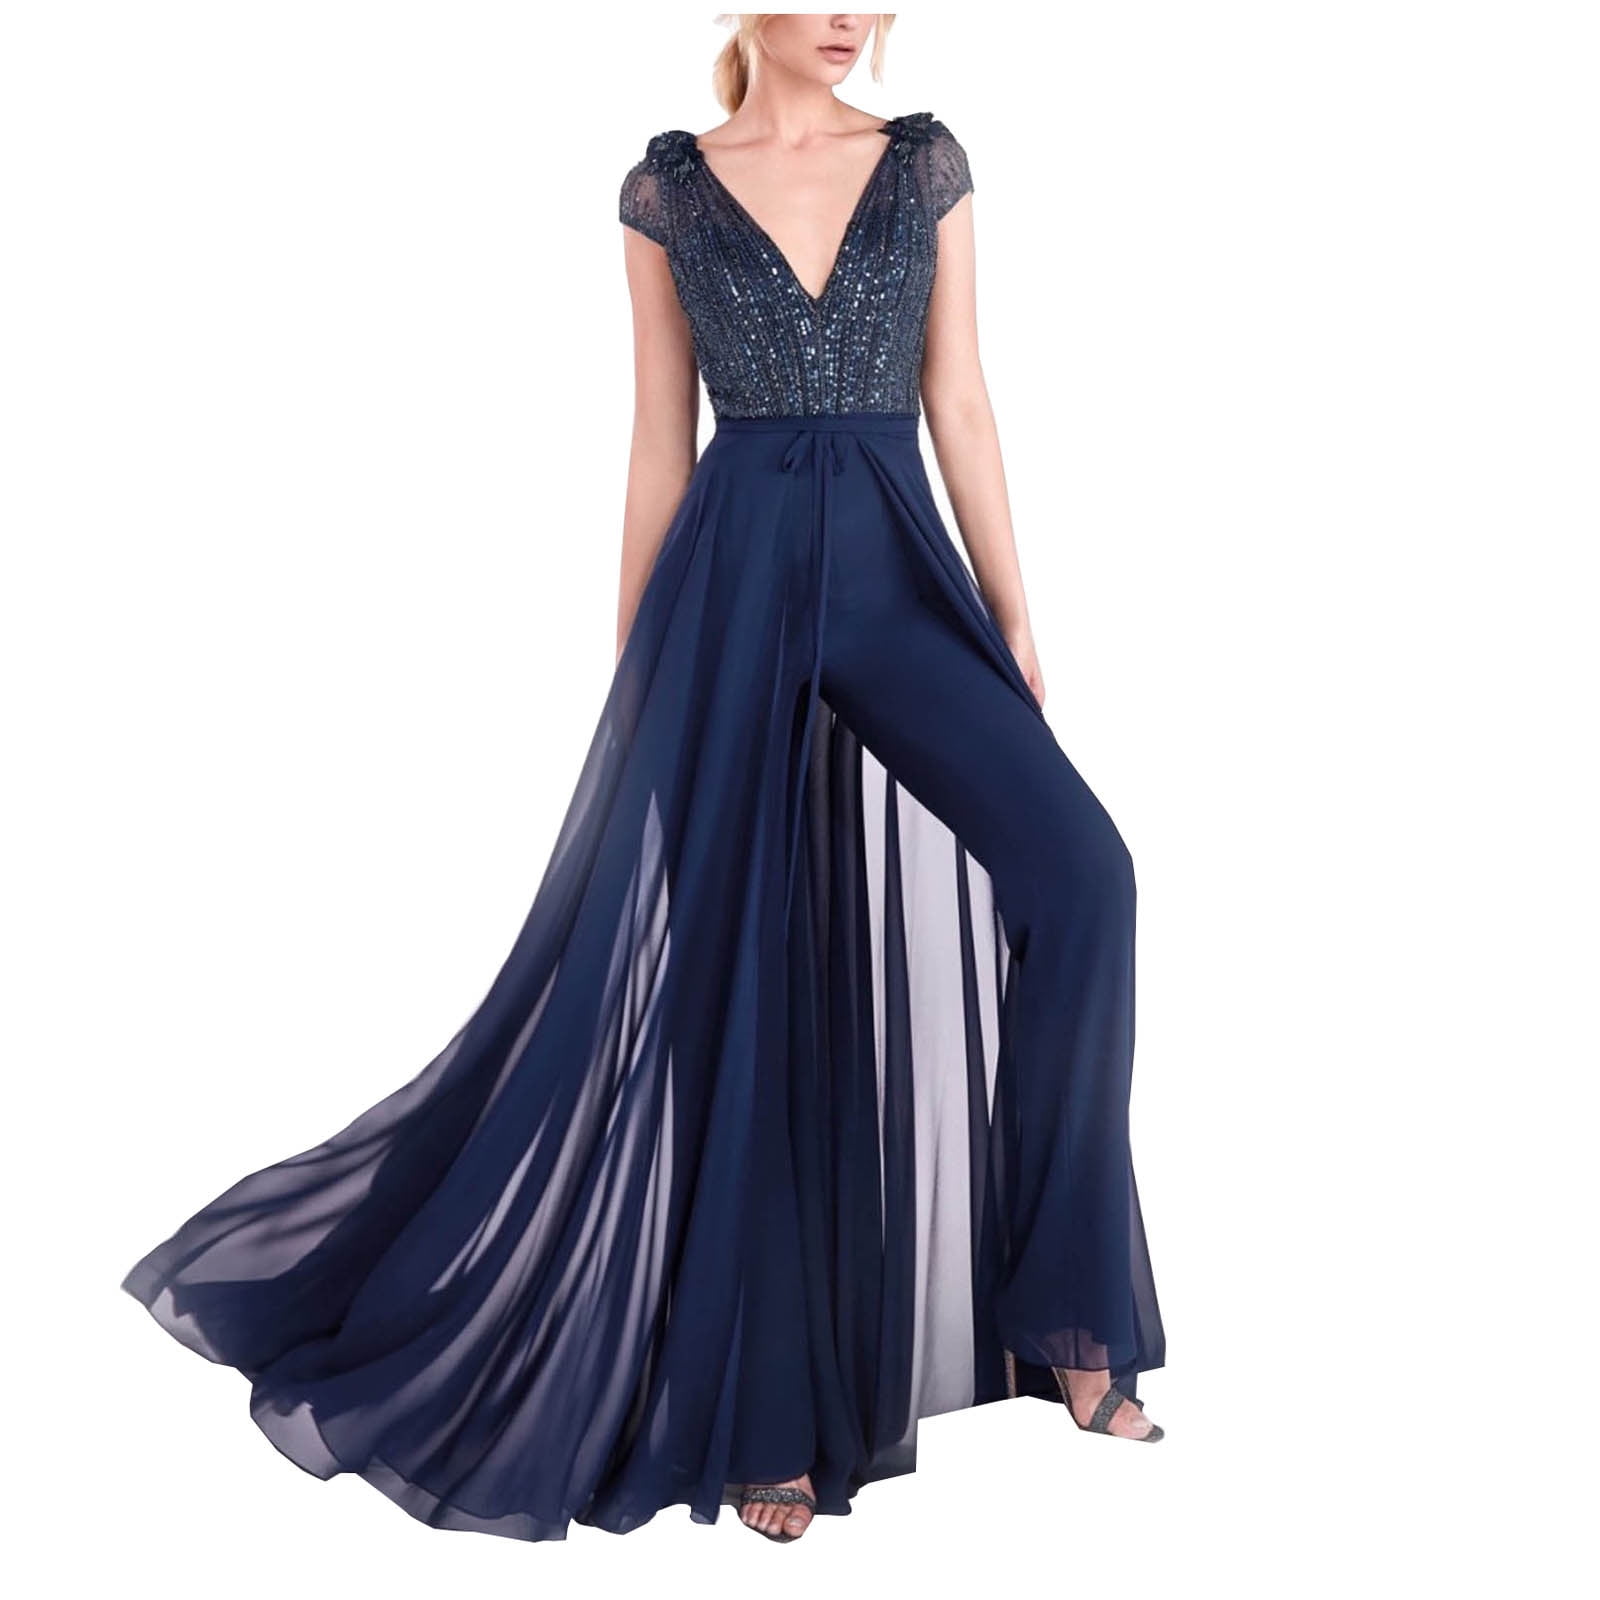 Wedding Formal Jumpsuit for Women Sexy Deep V Neck Lace Shiny Veil Rompers Sequin Robe Layer Pants for Cocktail Party 5e566b3f a45b 4a7d 8e8b 3d41d64bd828.d7a3f58d10f707597faea935b8a77108